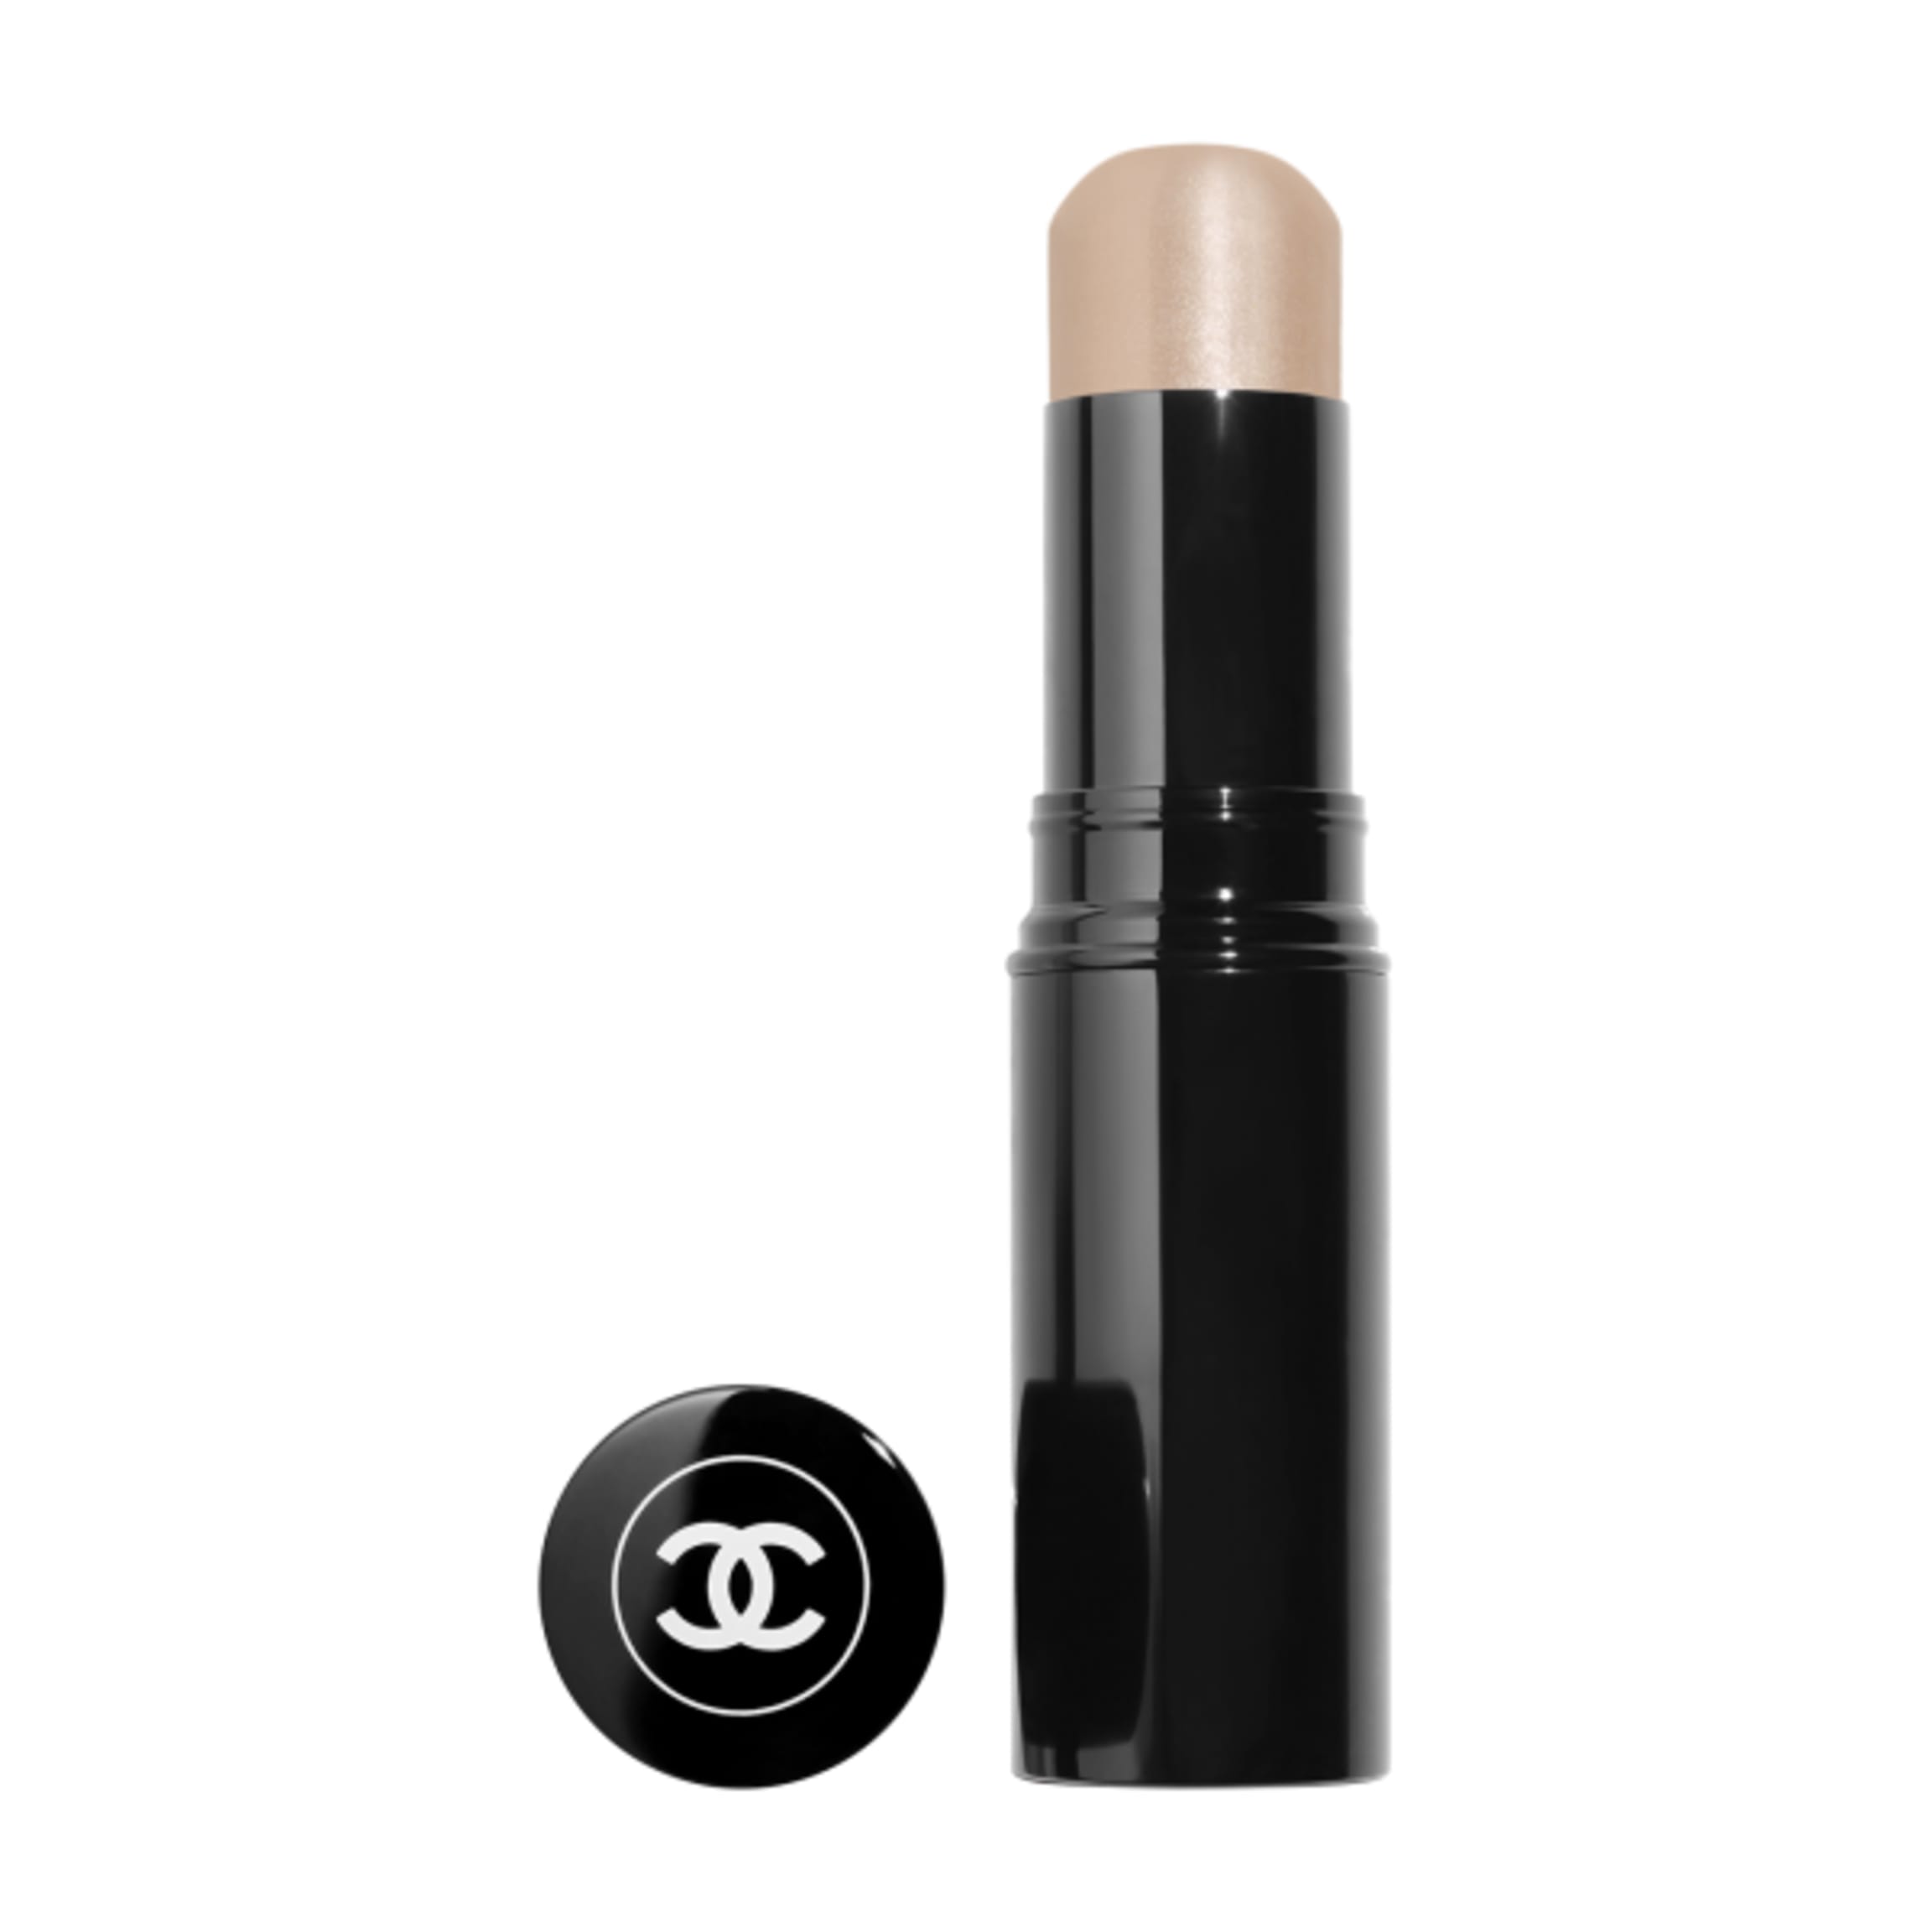 Chanel multi-use glow stick available at Chanel.